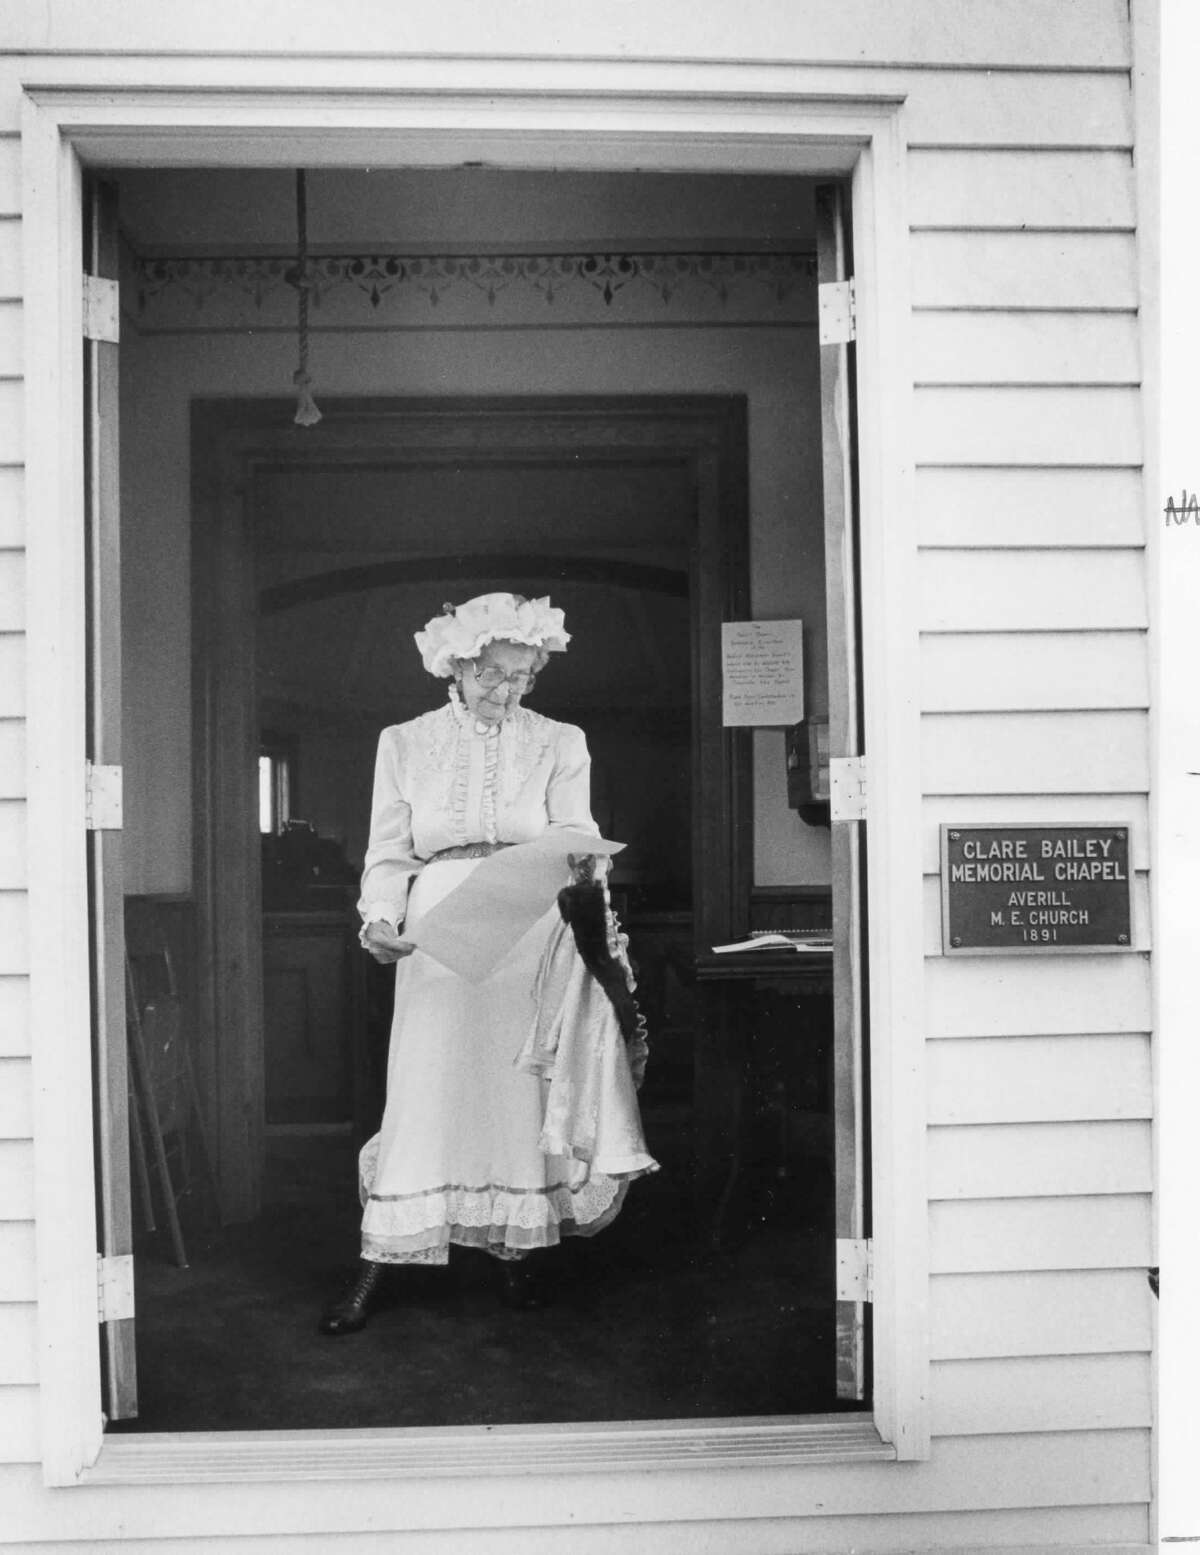 Dressed in costume from the past, Gertrude Bailey scans a history of the Averill Methodist Church before posting it at the Sanford Museum. The 1891 church structure was donated to the museum by Bailey in memory of her husband, Clare Bailey. September 1987